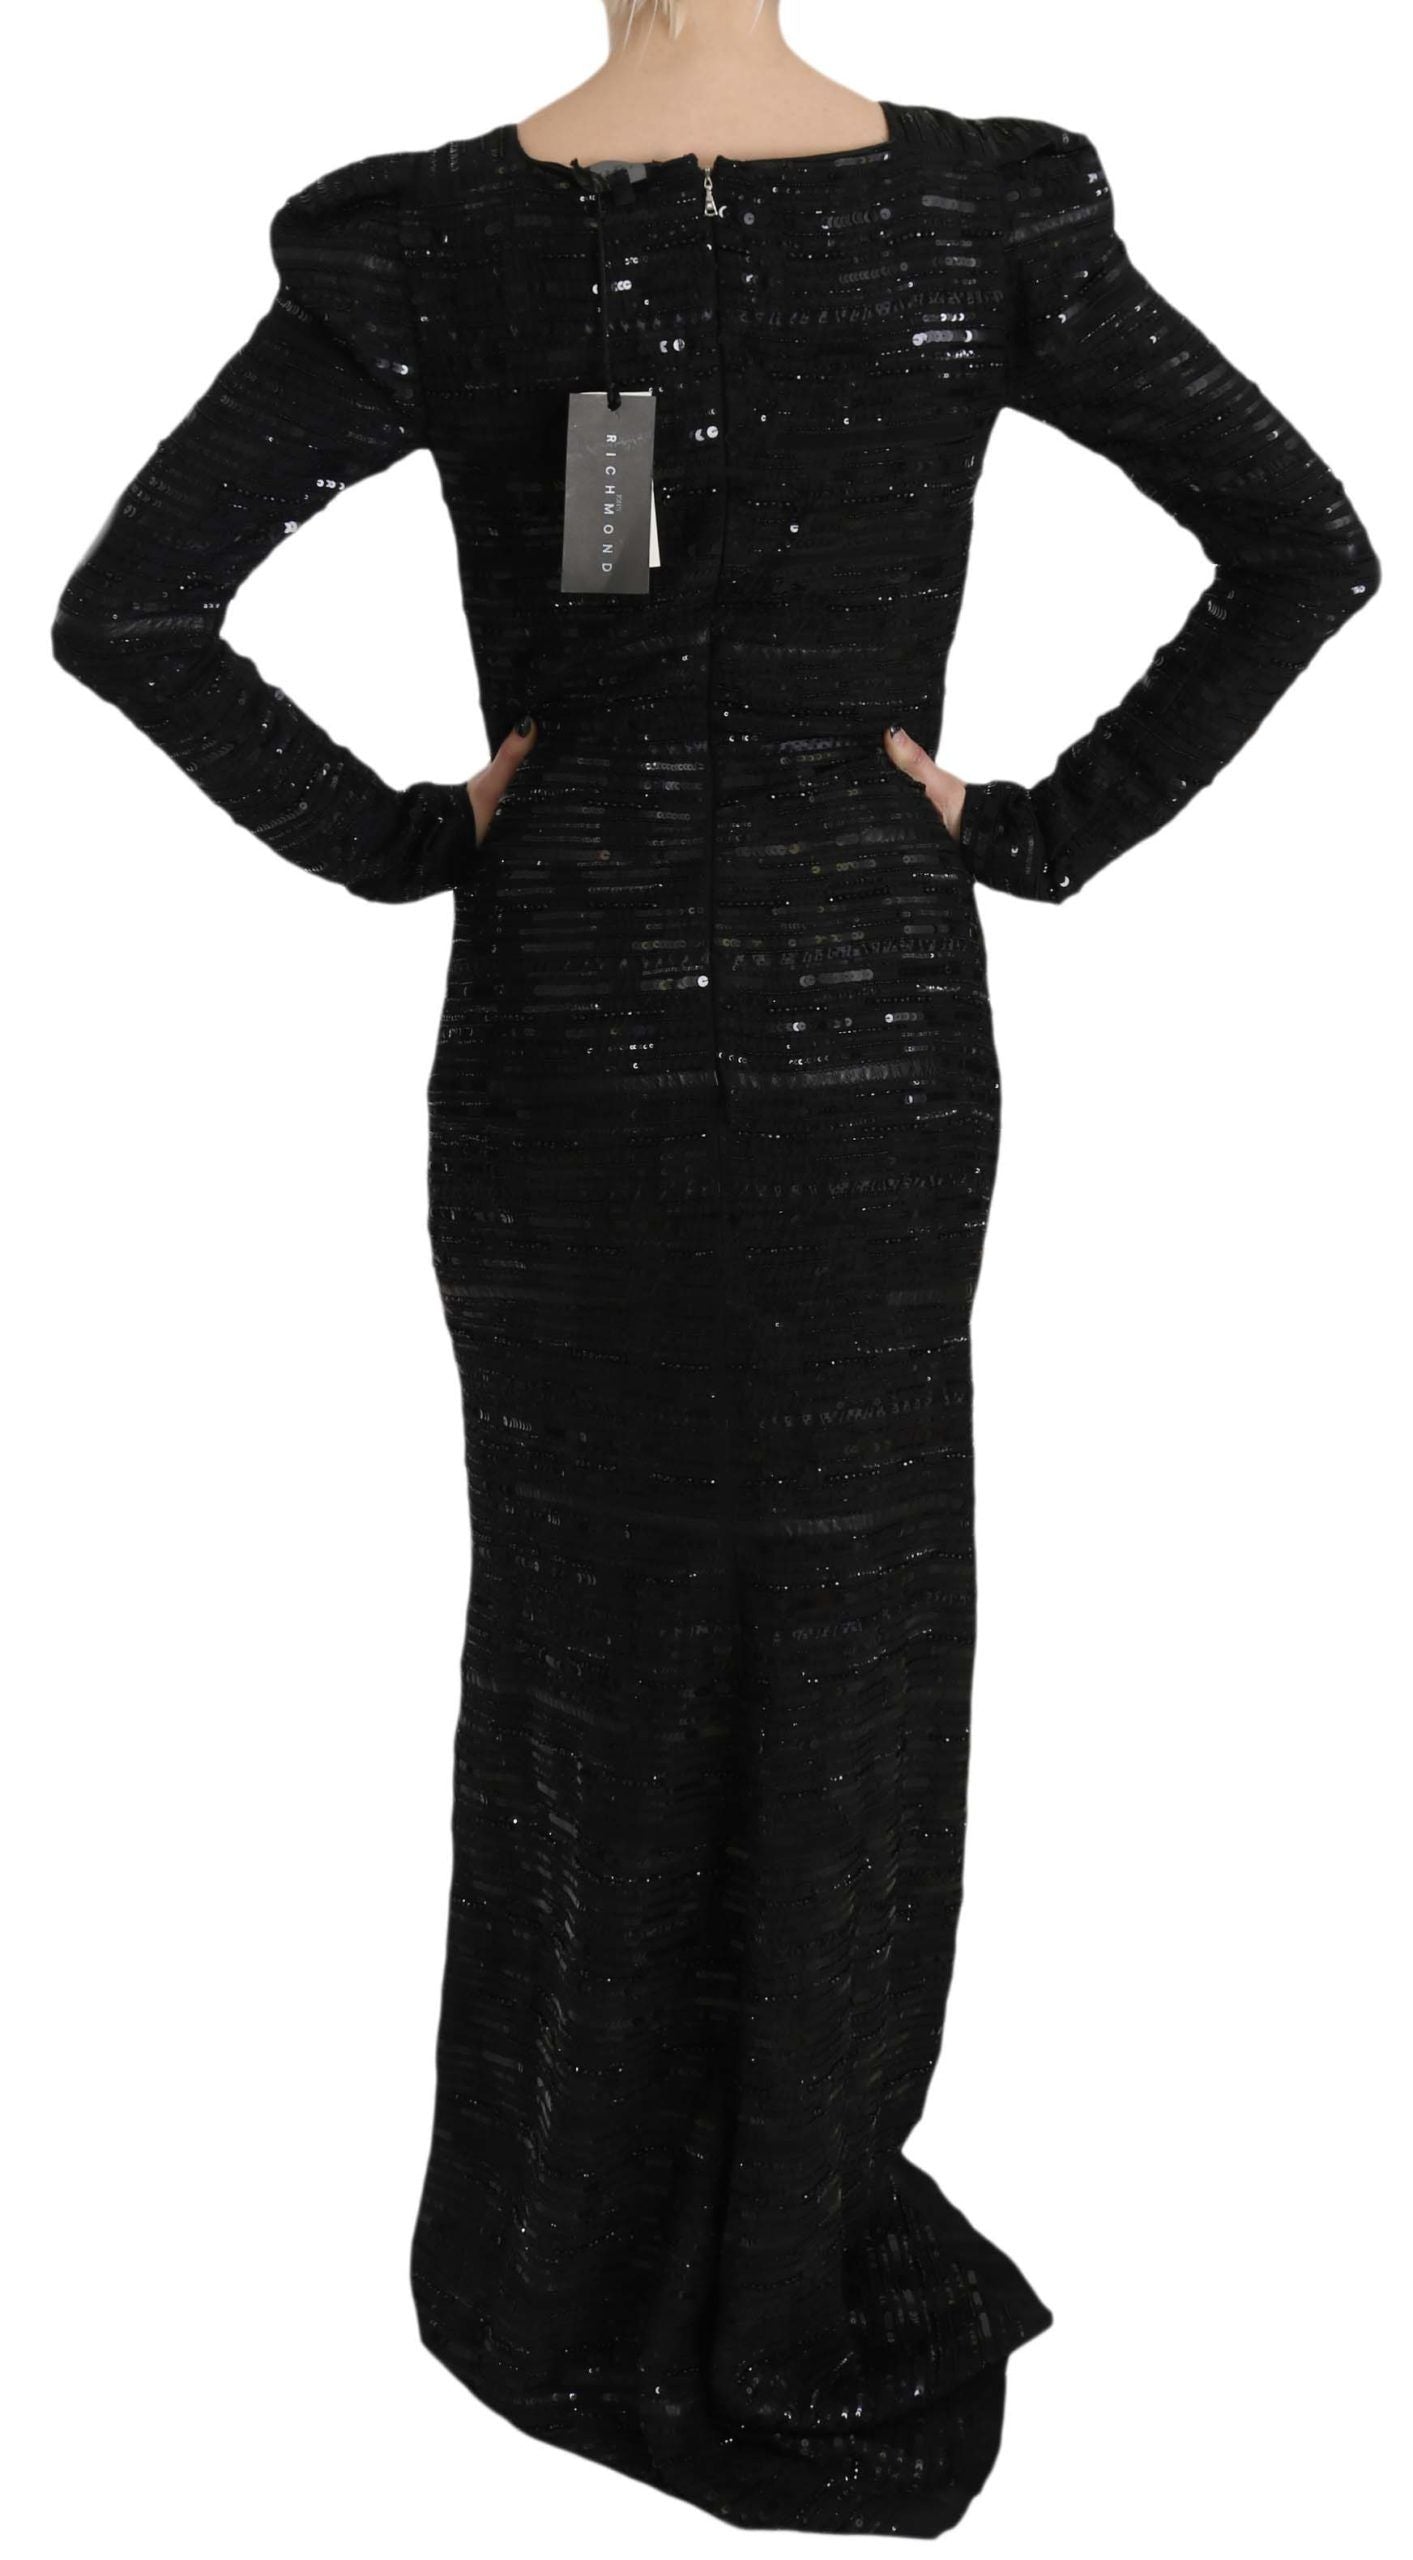 Black Silk Full Length Sequined Gown Dress - Designed by John Richmond Available to Buy at a Discounted Price on Moon Behind The Hill Online Designer Discount Store